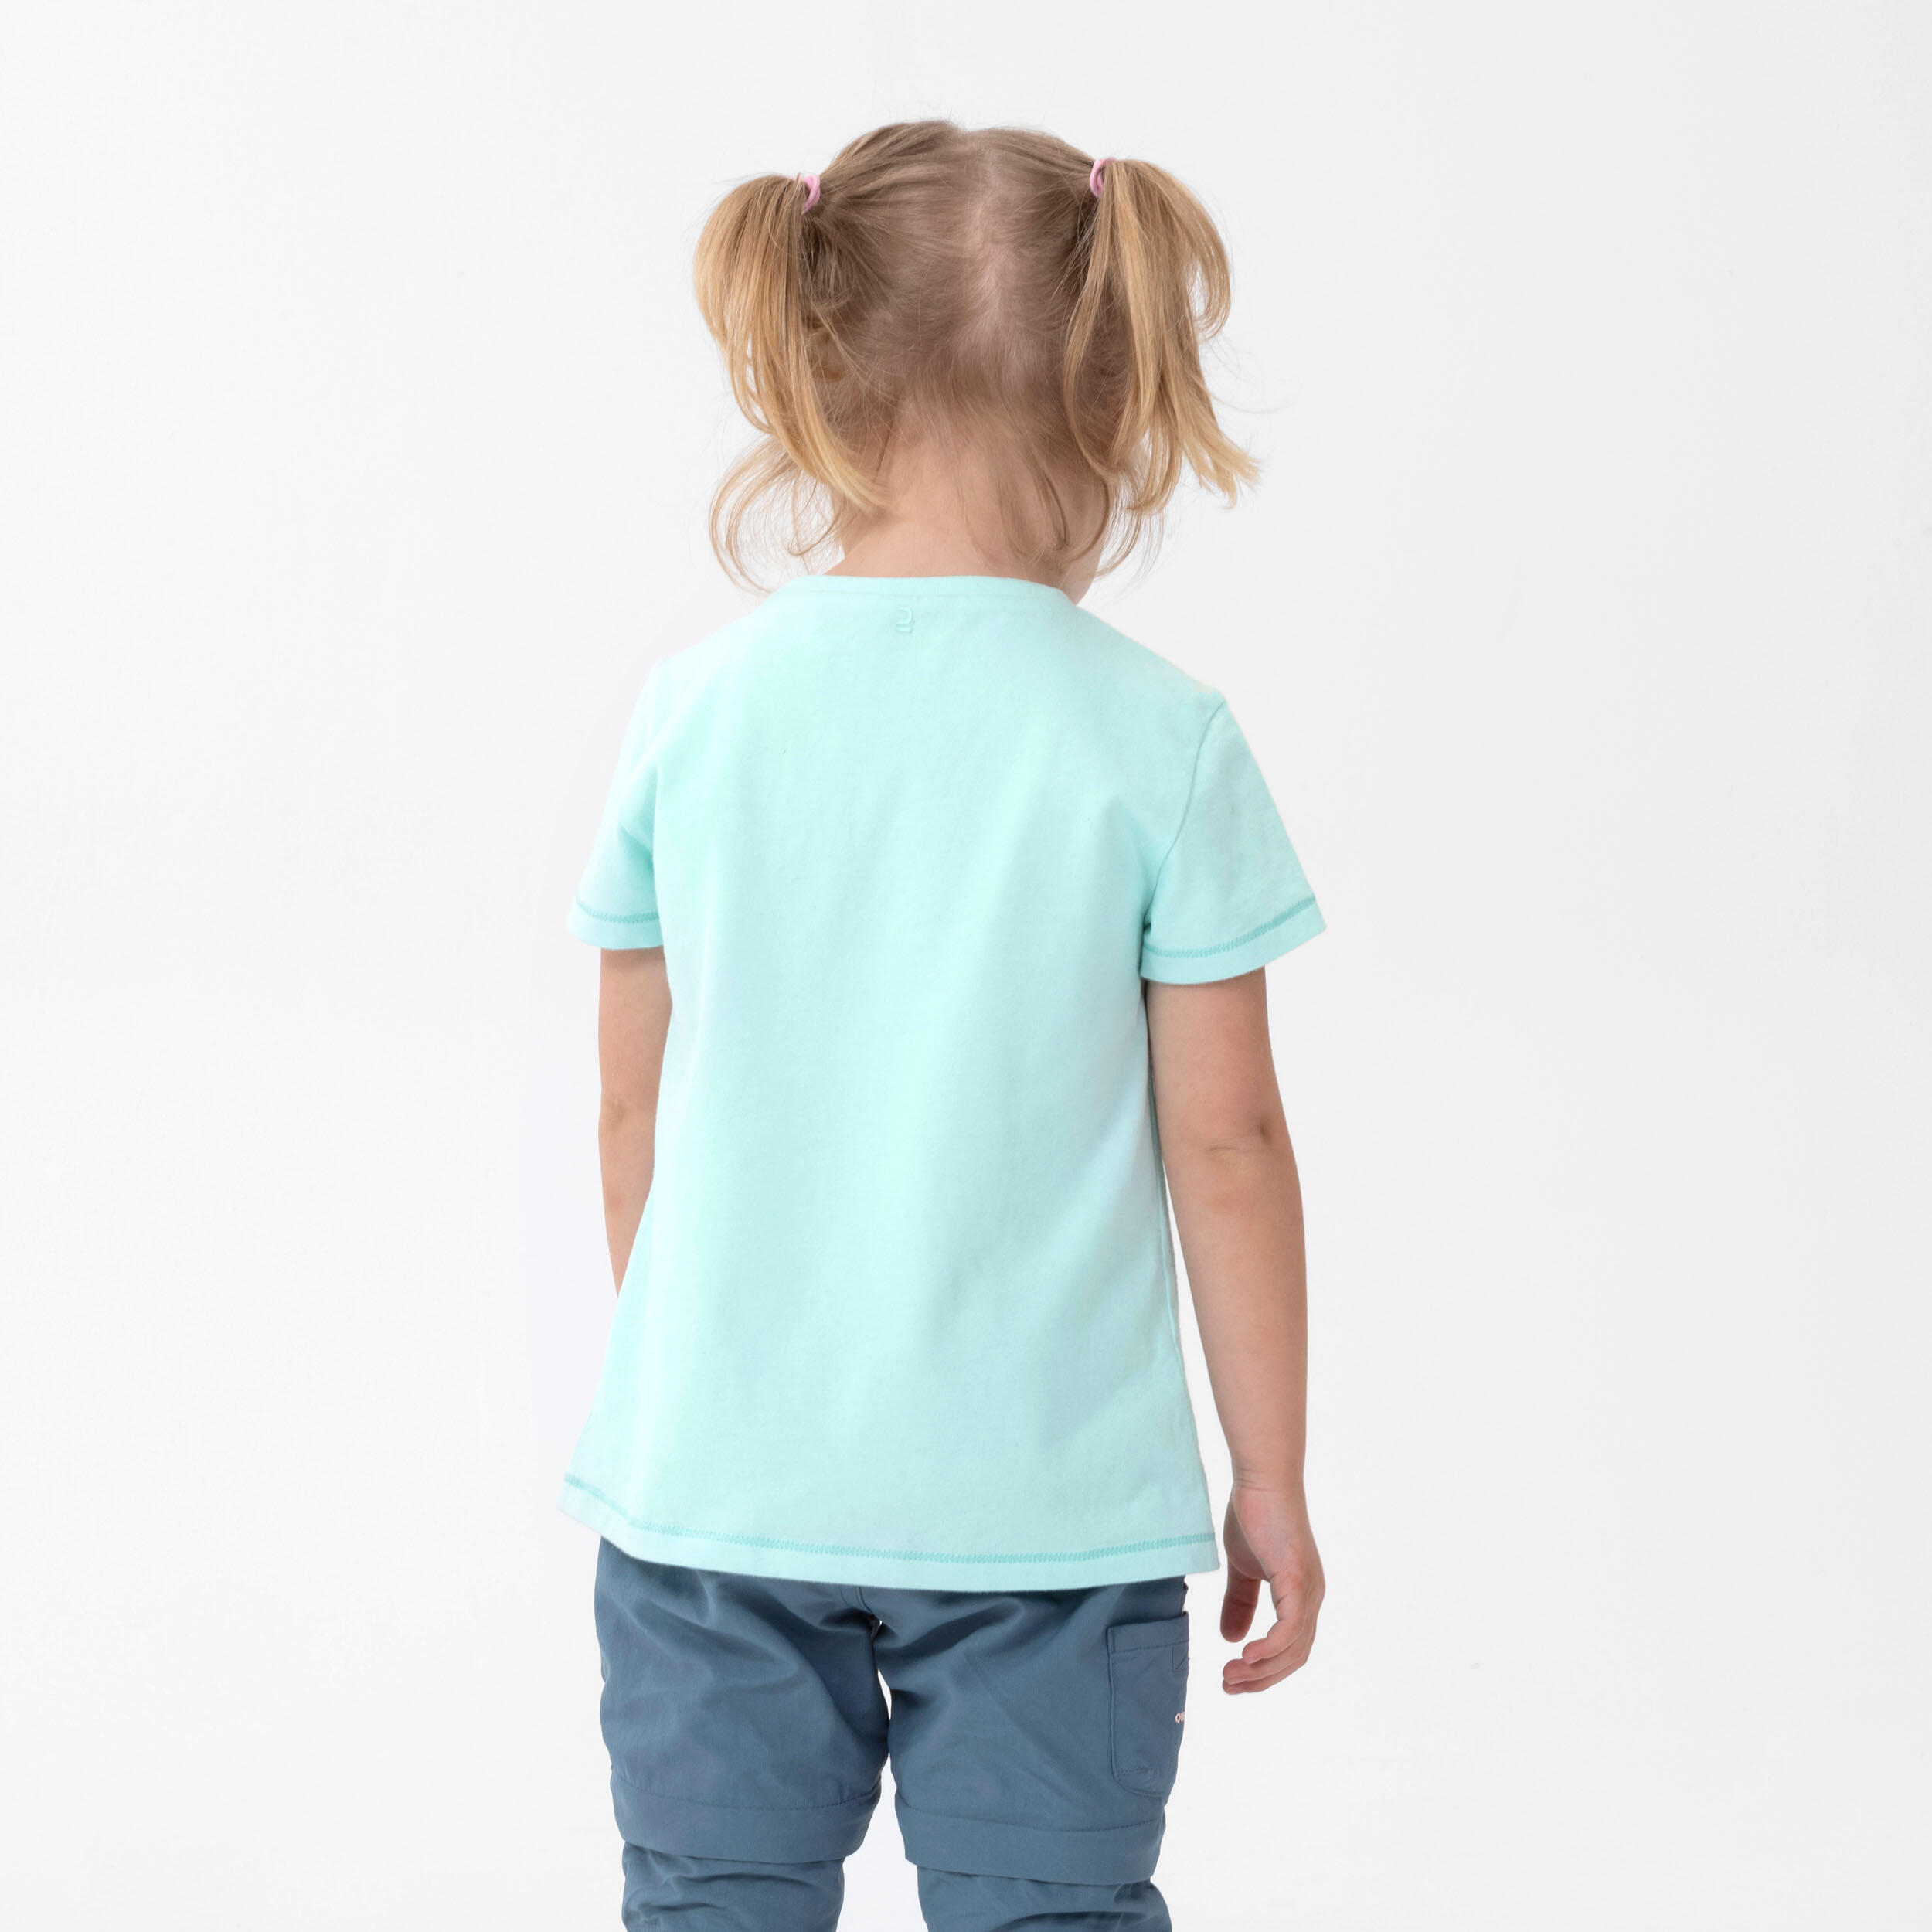 QUECHUA Kids' Hiking T-Shirt - MH100 KID Aged 2-6 - Turquoise Glow